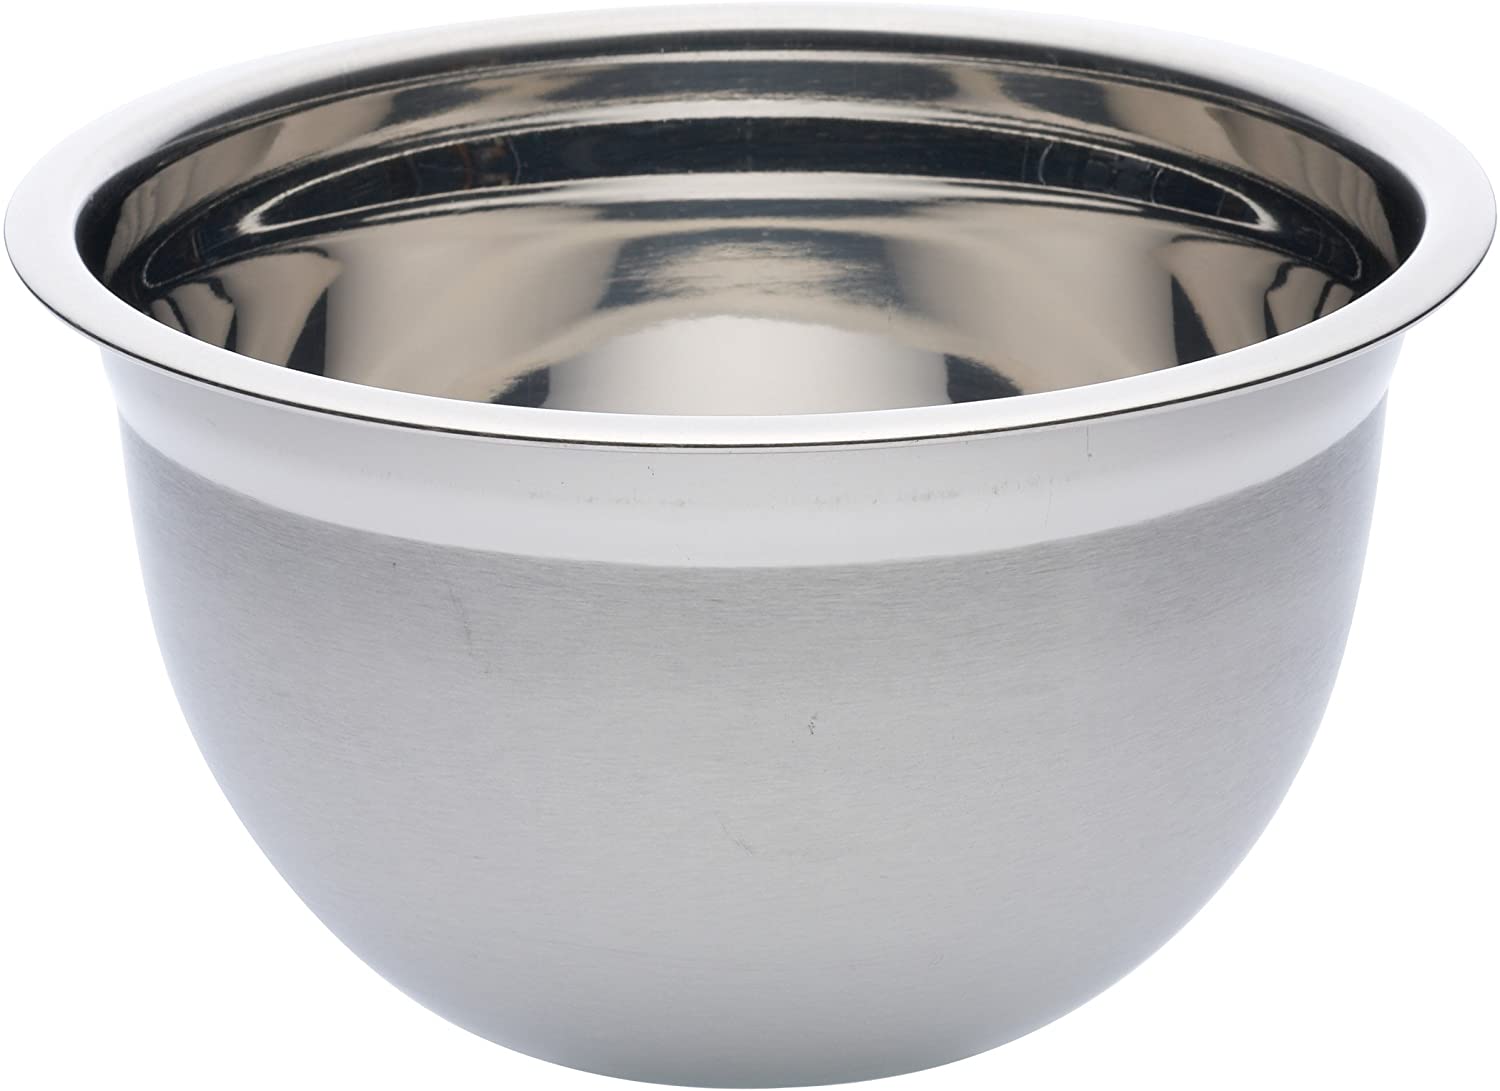 Kitchen Craft Deluxe Stainless Steel 21.5 cm - 2 Litre Round Bowl